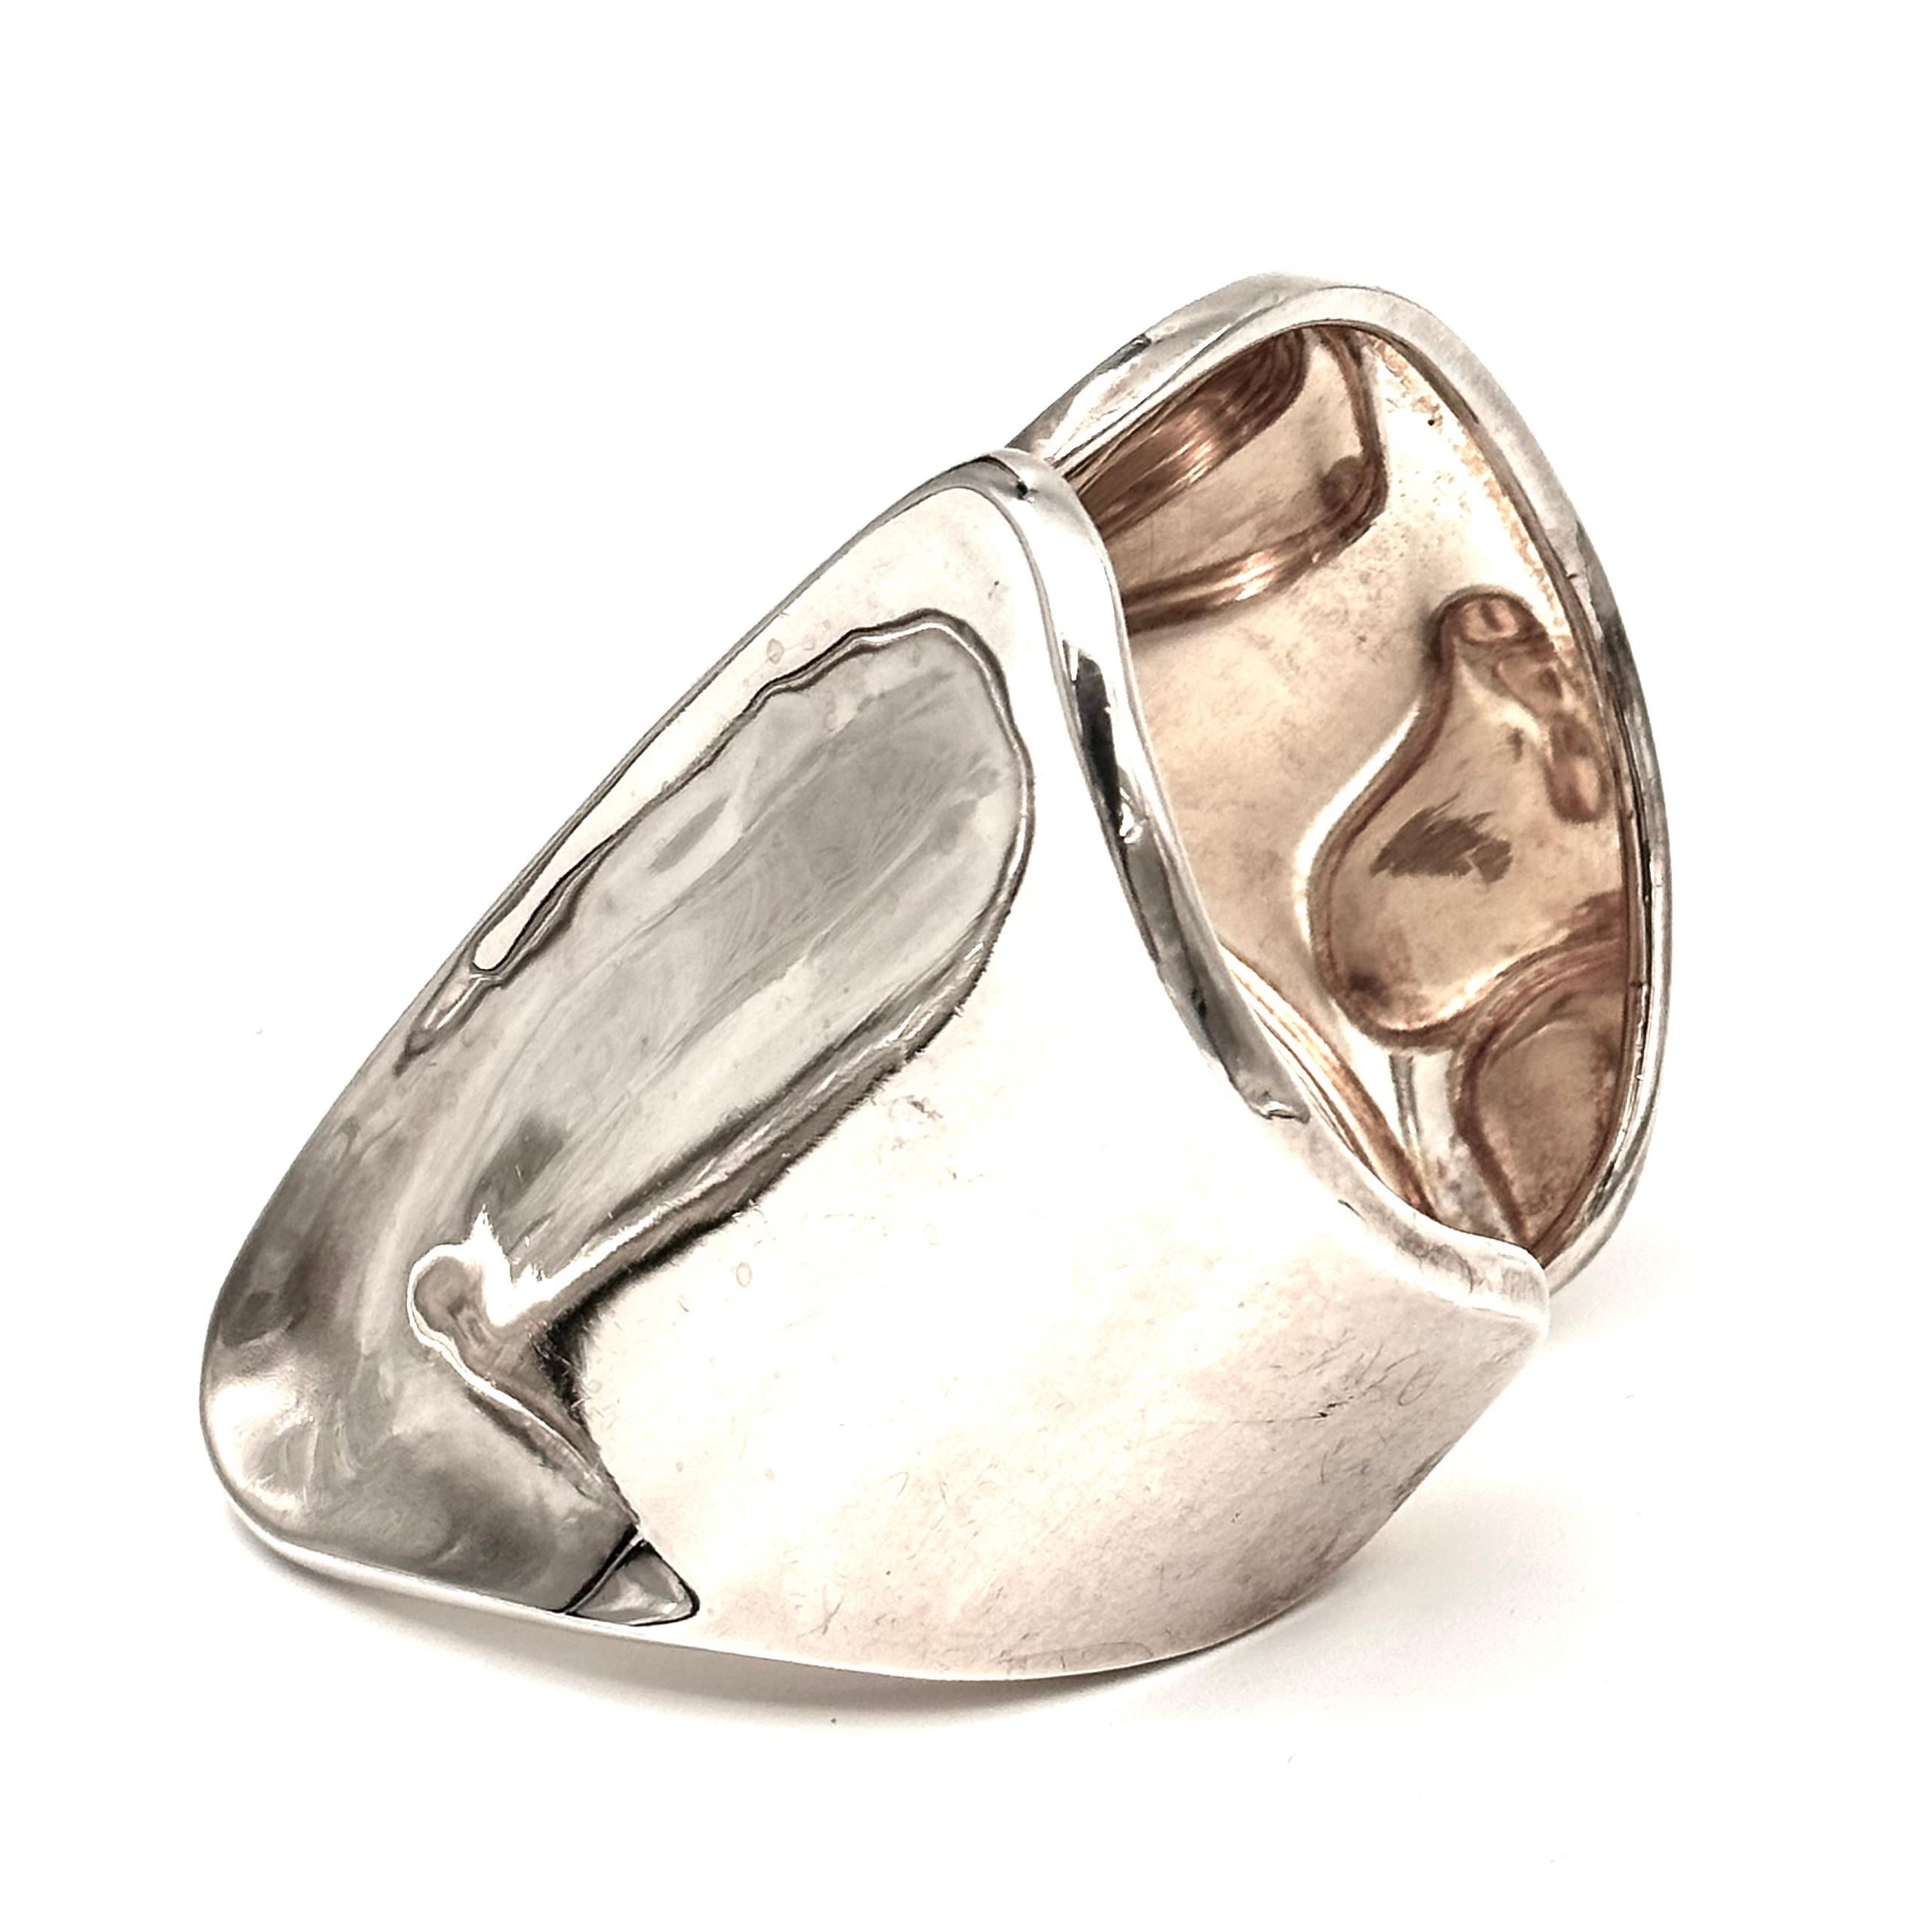 The soft abstract design of this dramatic cuff, is of two wings, gently meeting, with a thick edge of silver as the long curved vertical line in the center. Gleaming bright silver plated brass, this cuff is gorgeous bold and comfortable to wear. One